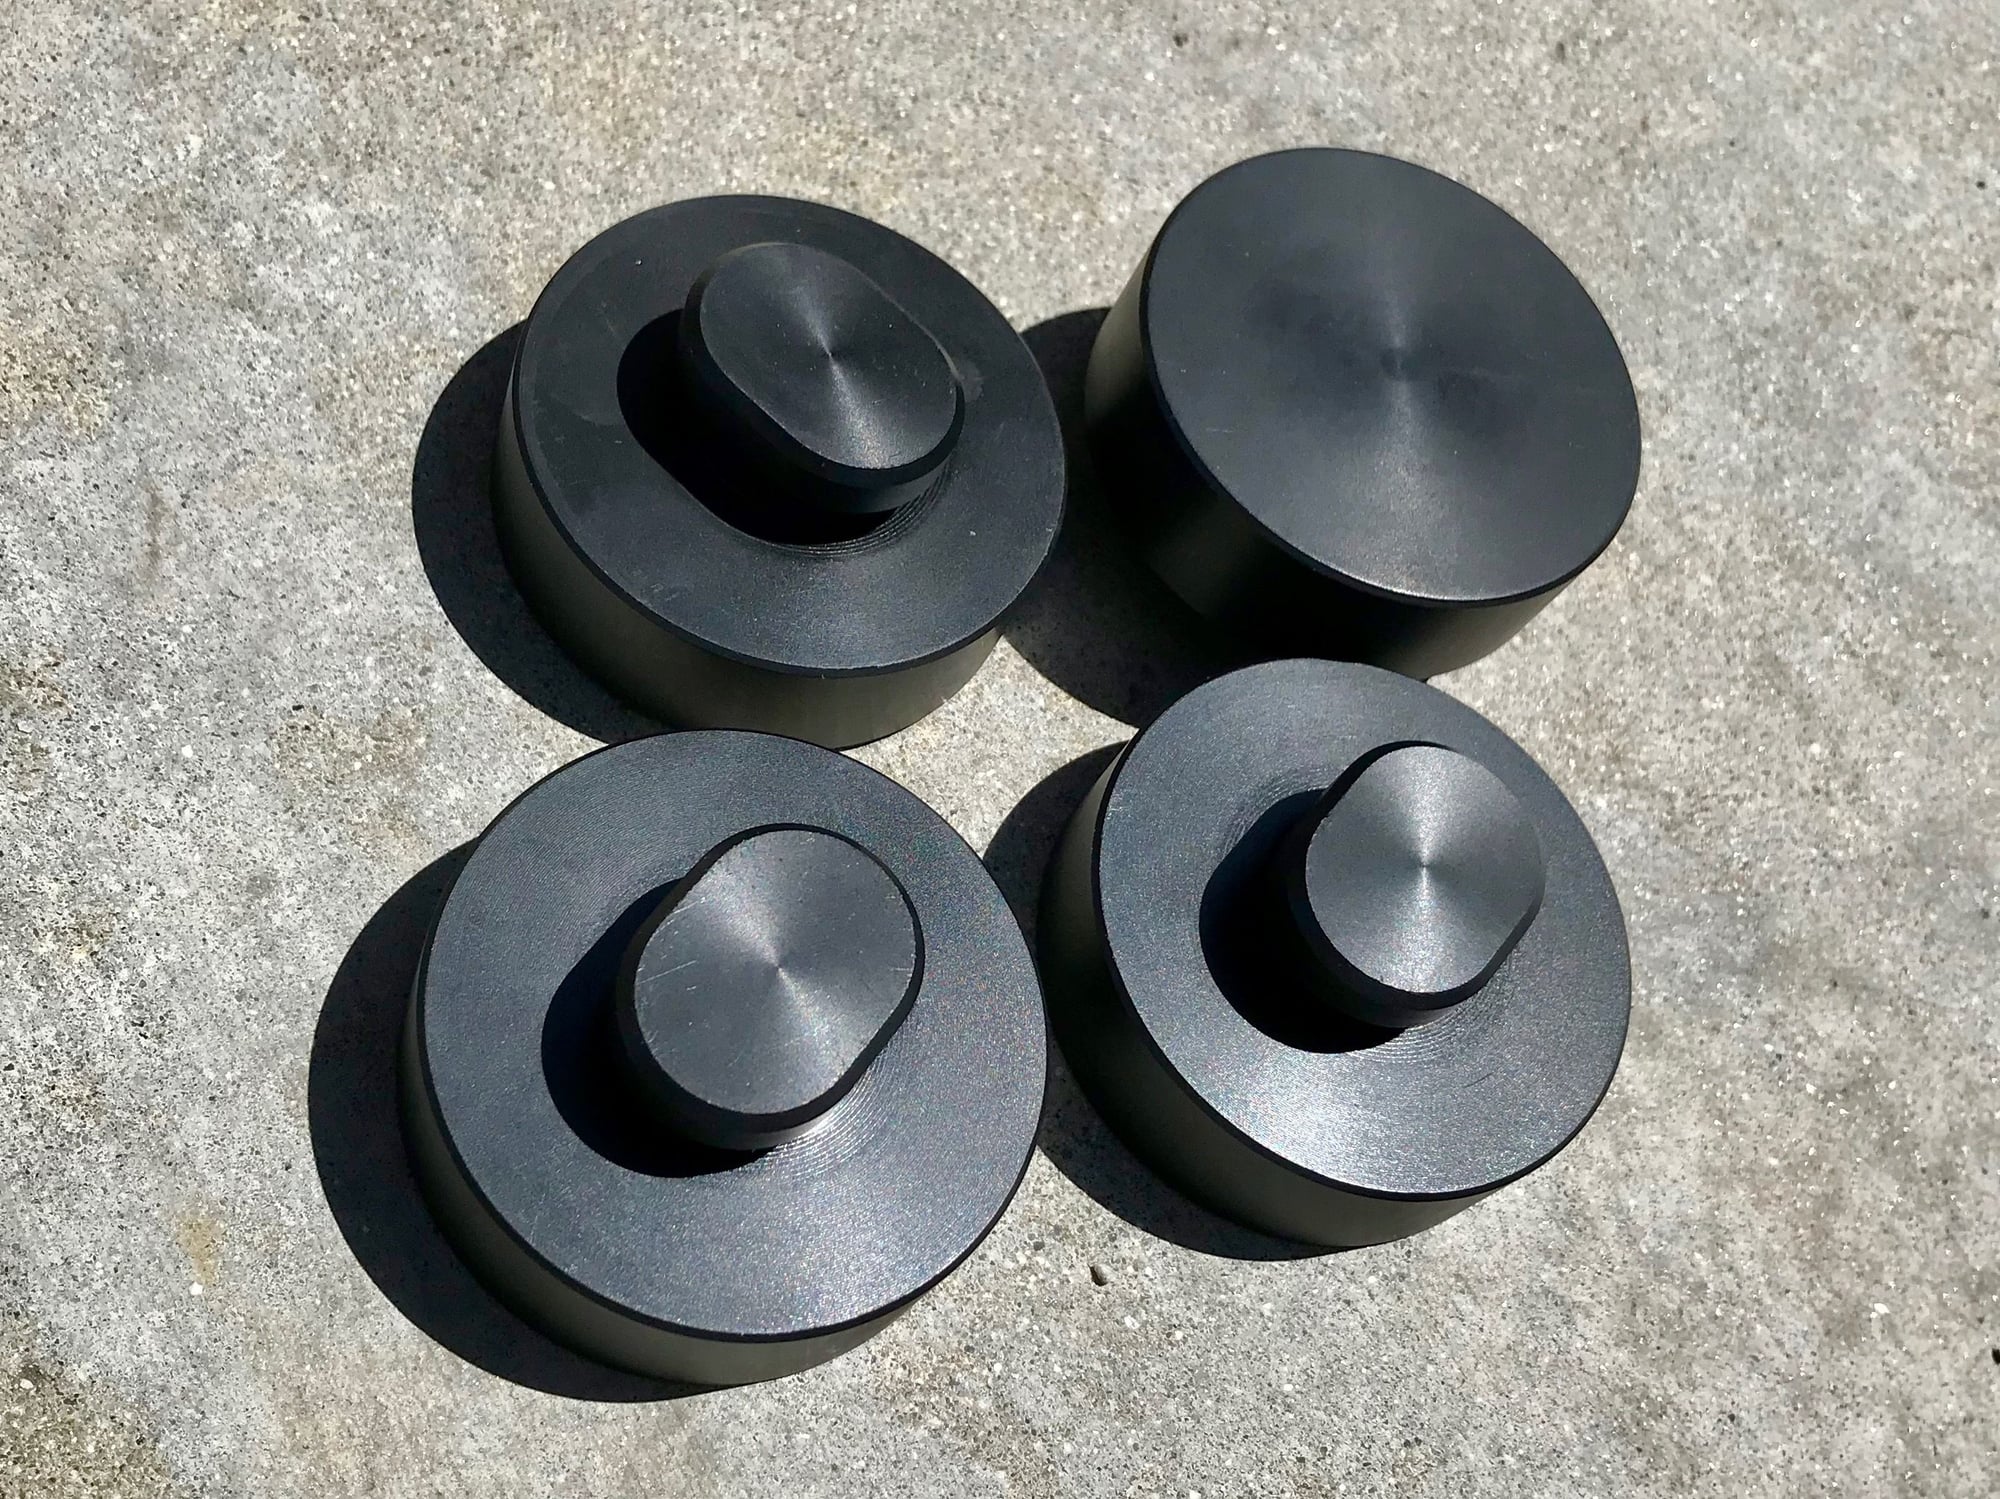 Accessories - Lift Pucks - set of 4 pucks - Used - 2001 to 2012 Porsche 911 - Seal Beach, CA 90740, United States